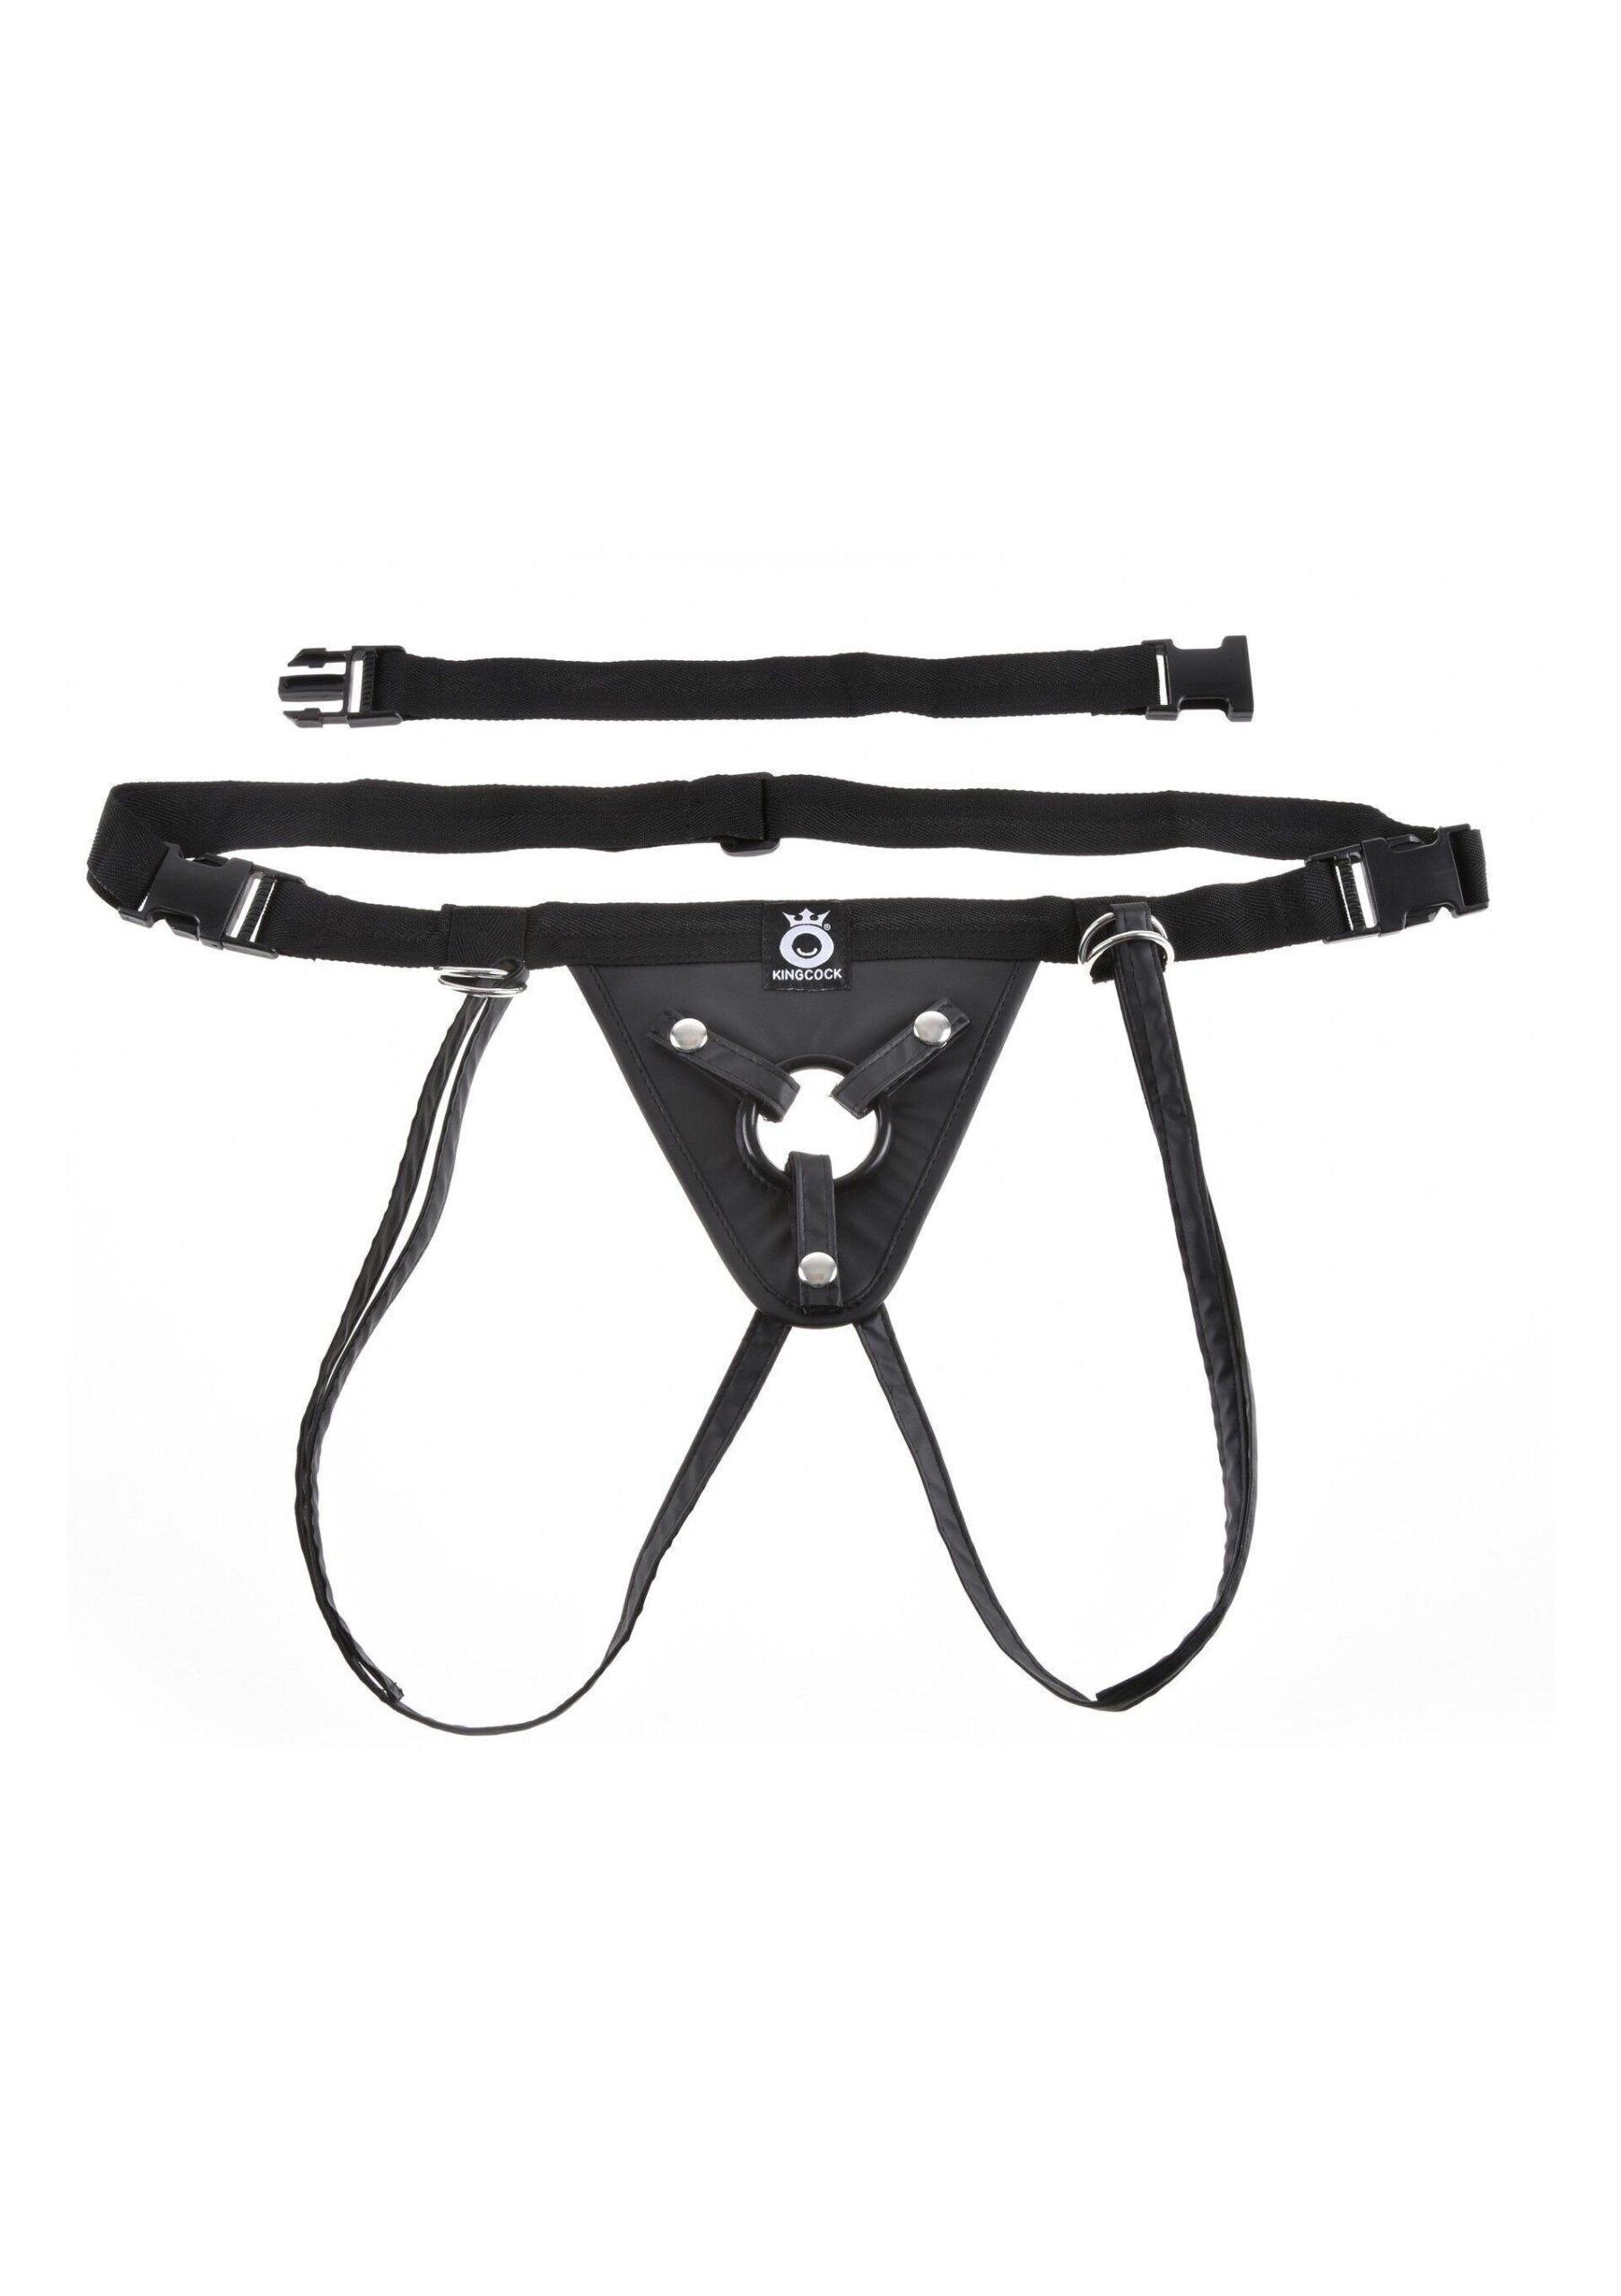 Imbracatura STRAP-ON Fit Rite